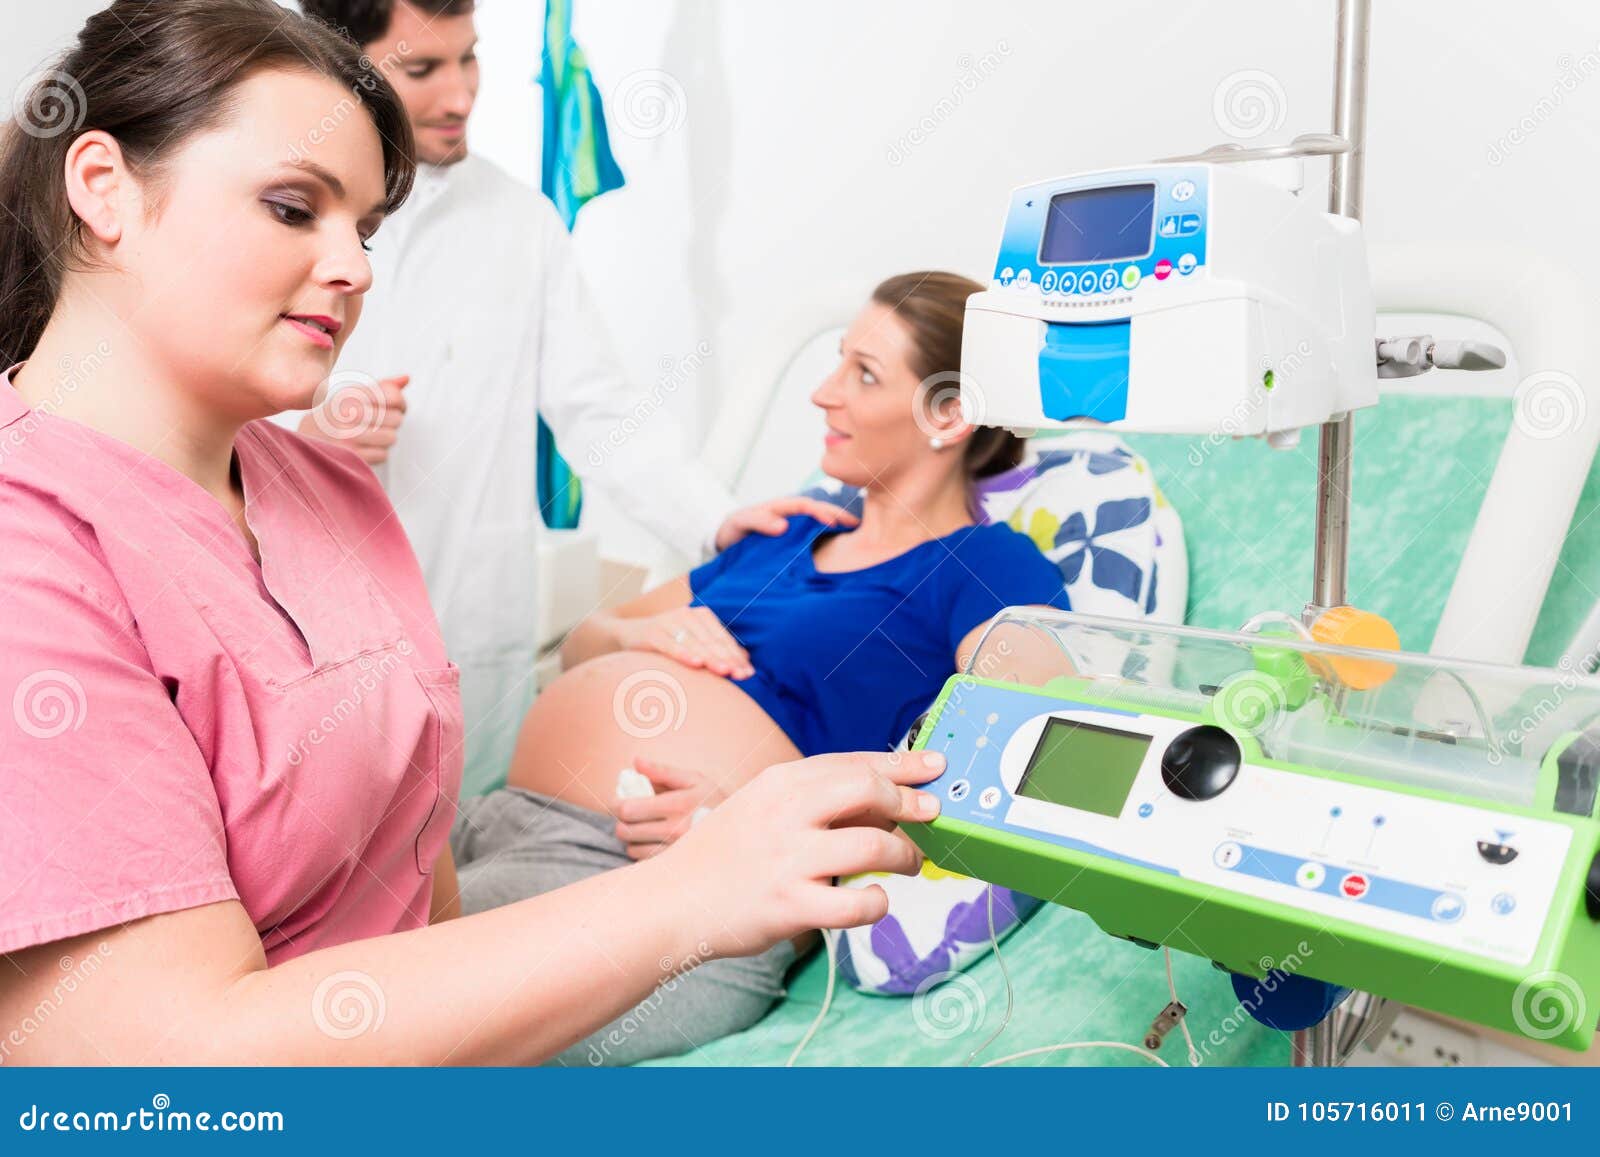 pregnant woman in labor room with doctor and nurse